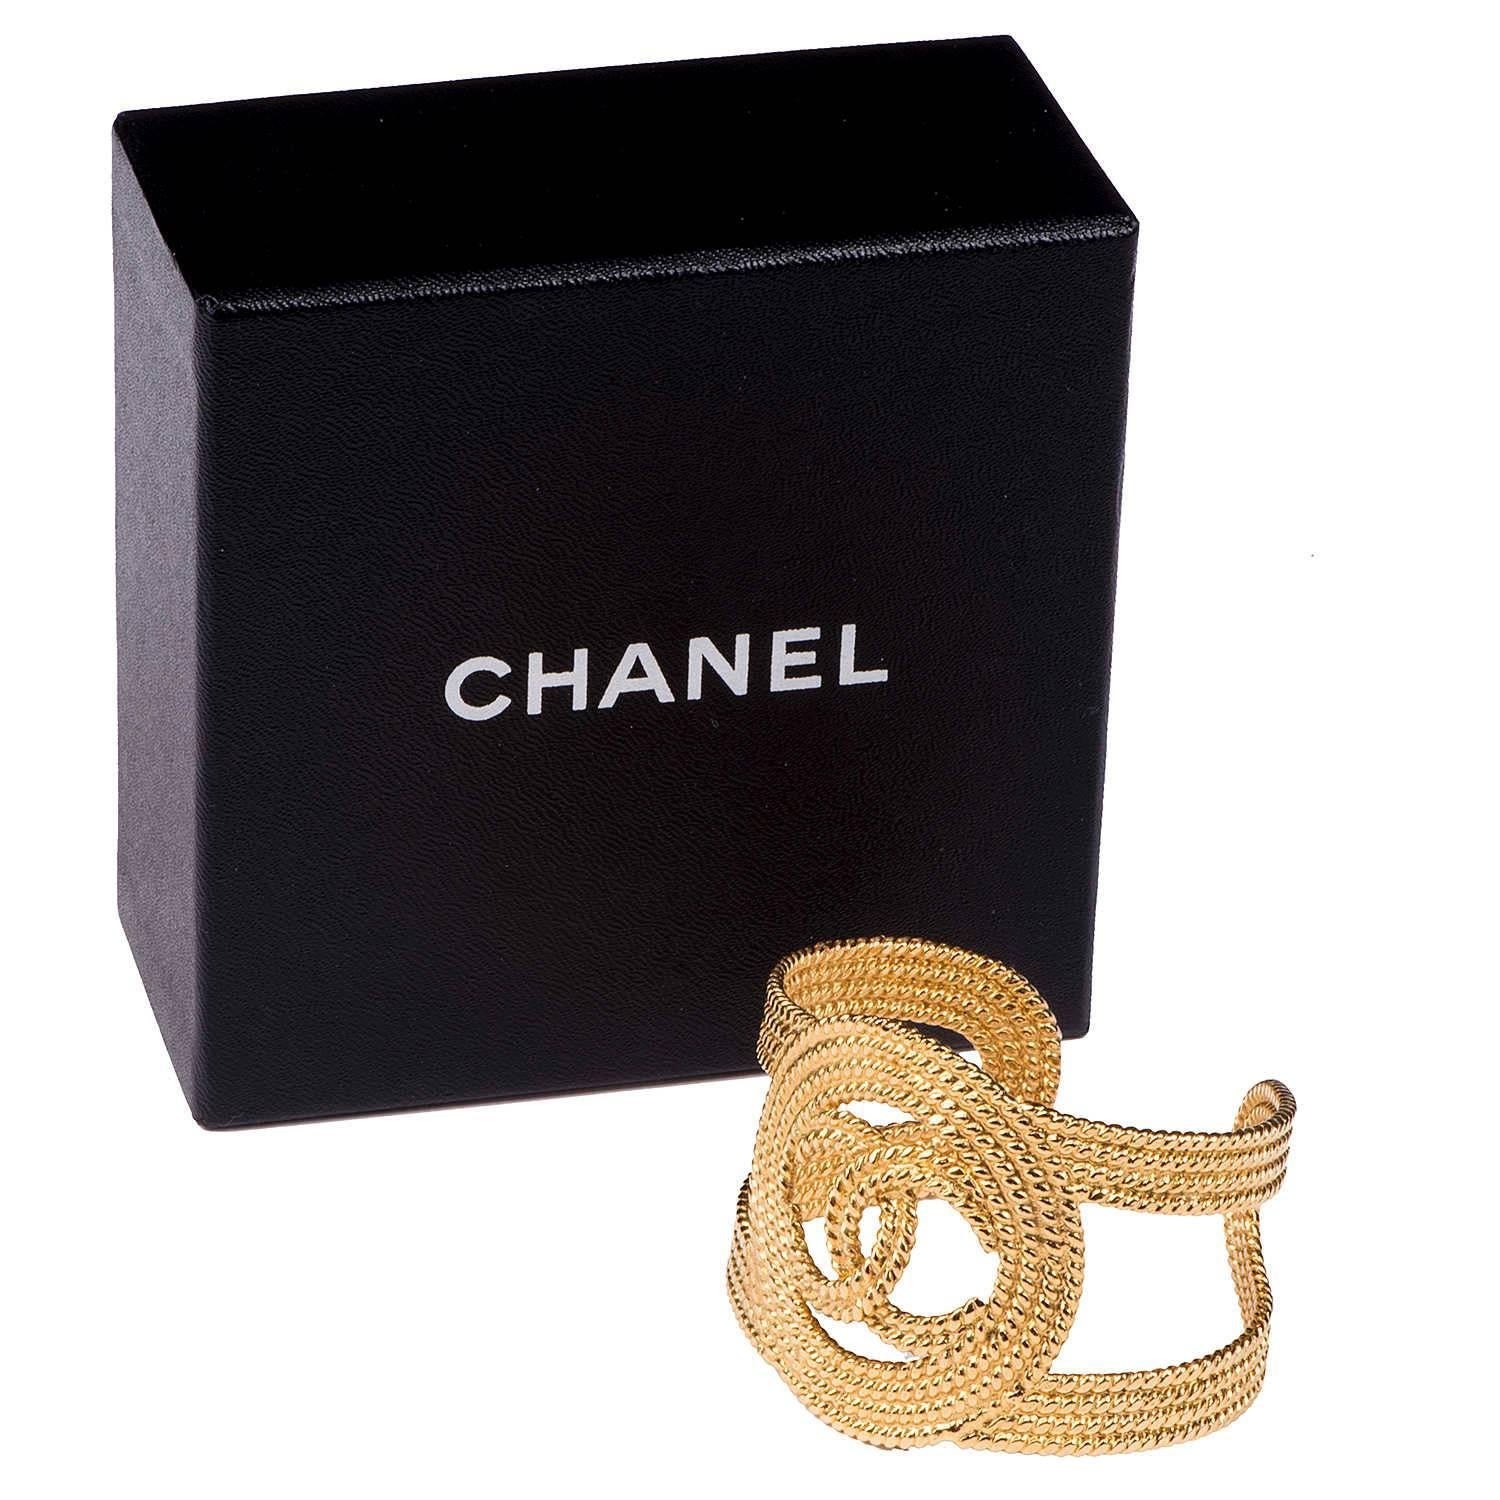 A real statement piece!! A Chanel braided gold cuff, centered with the classic interlocking 'C' Chanel Logo. This fabulous 'cuff' bracelet is in pristine condition and comes with it's original Chanel gift box.